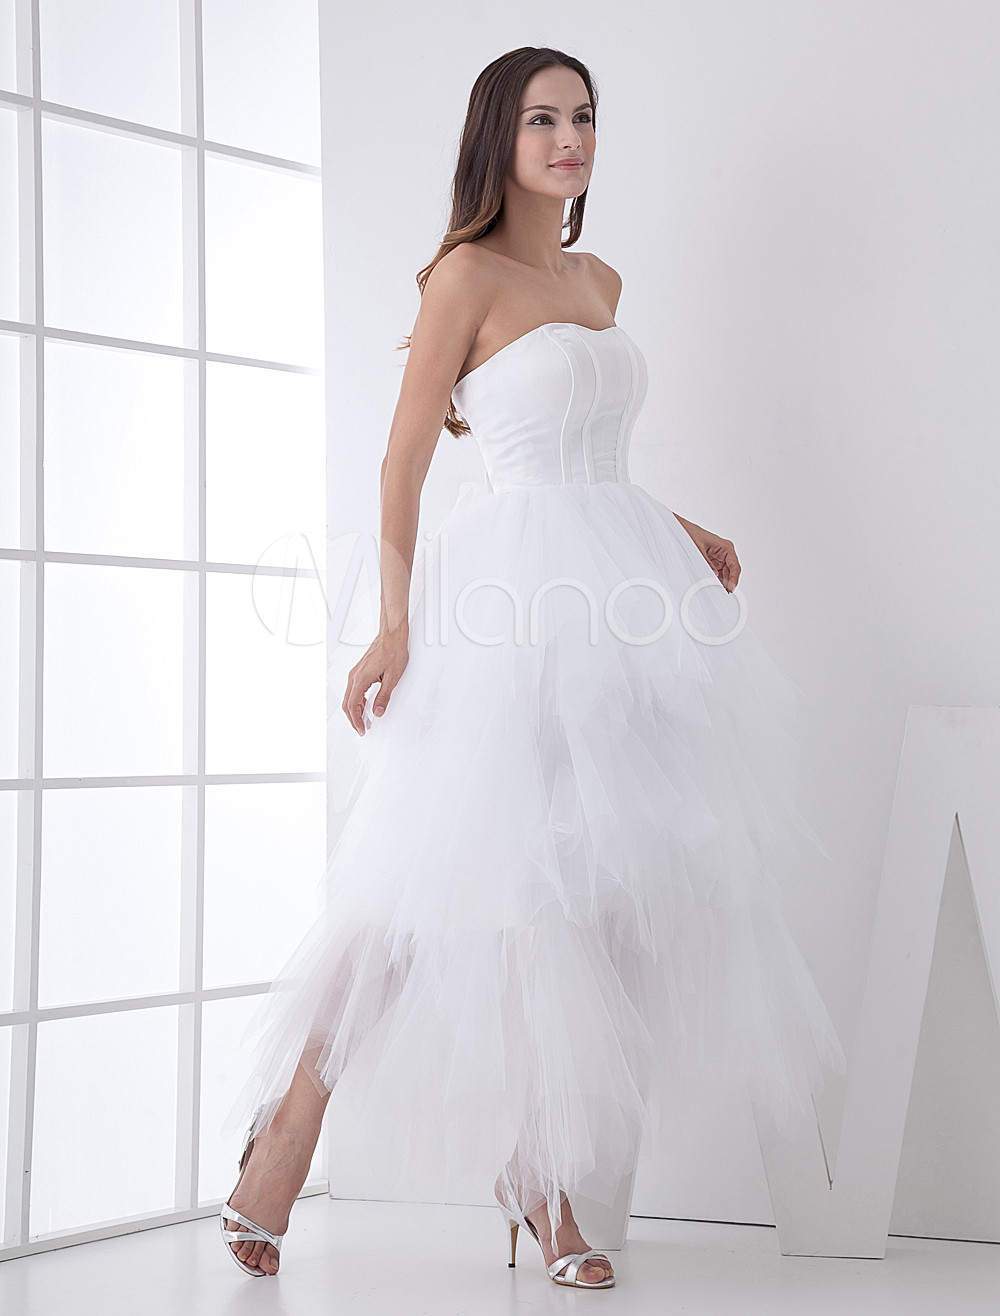 Great Mini White Wedding Dress in the world Don t miss out 